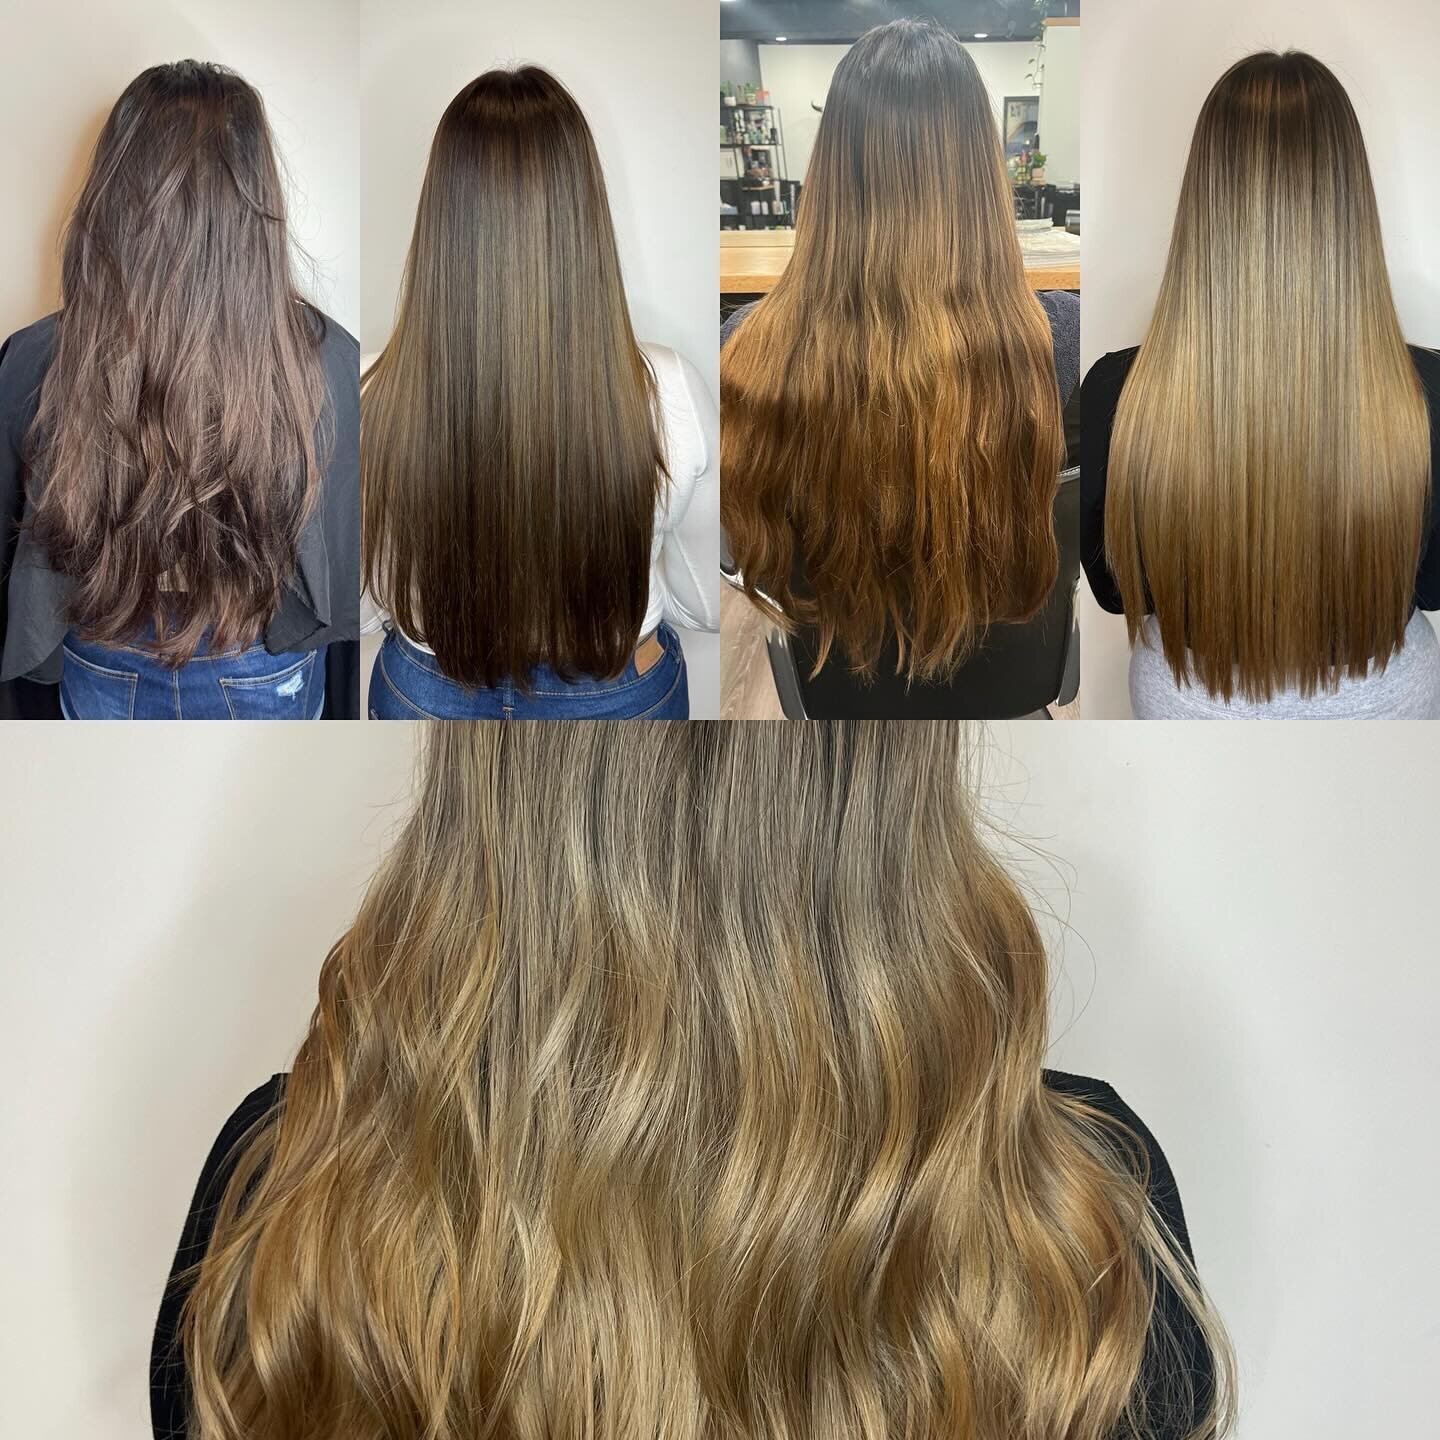 Box dye first and second session&hellip; so happy with the results so far!
It&rsquo;s CRUCIAL to approach this process slow and steady if the goal is maintain long, healthy hair in the transistion to blonde. Keep an eye out for session three in the N